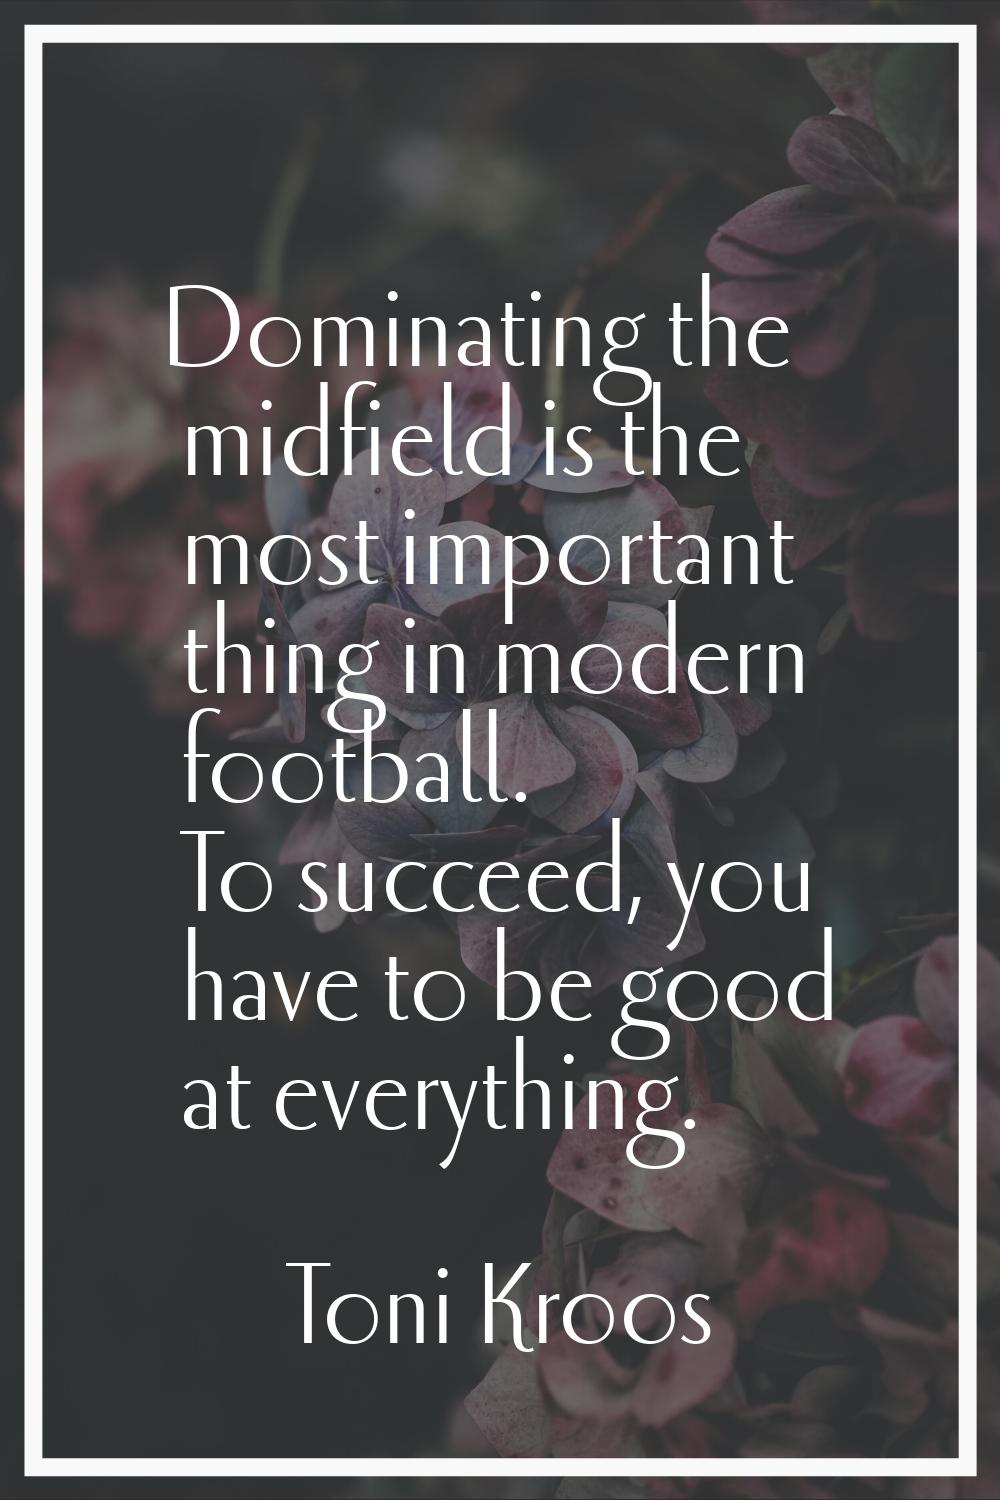 Dominating the midfield is the most important thing in modern football. To succeed, you have to be 